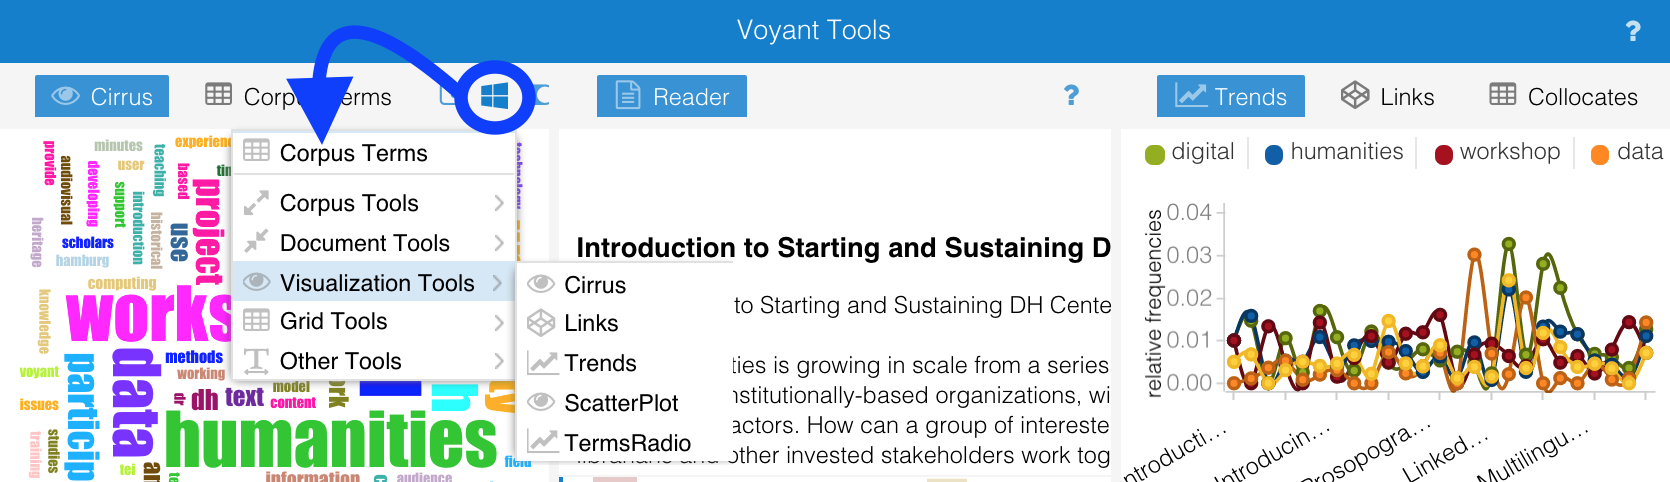 More Tools information from Voyant Tools